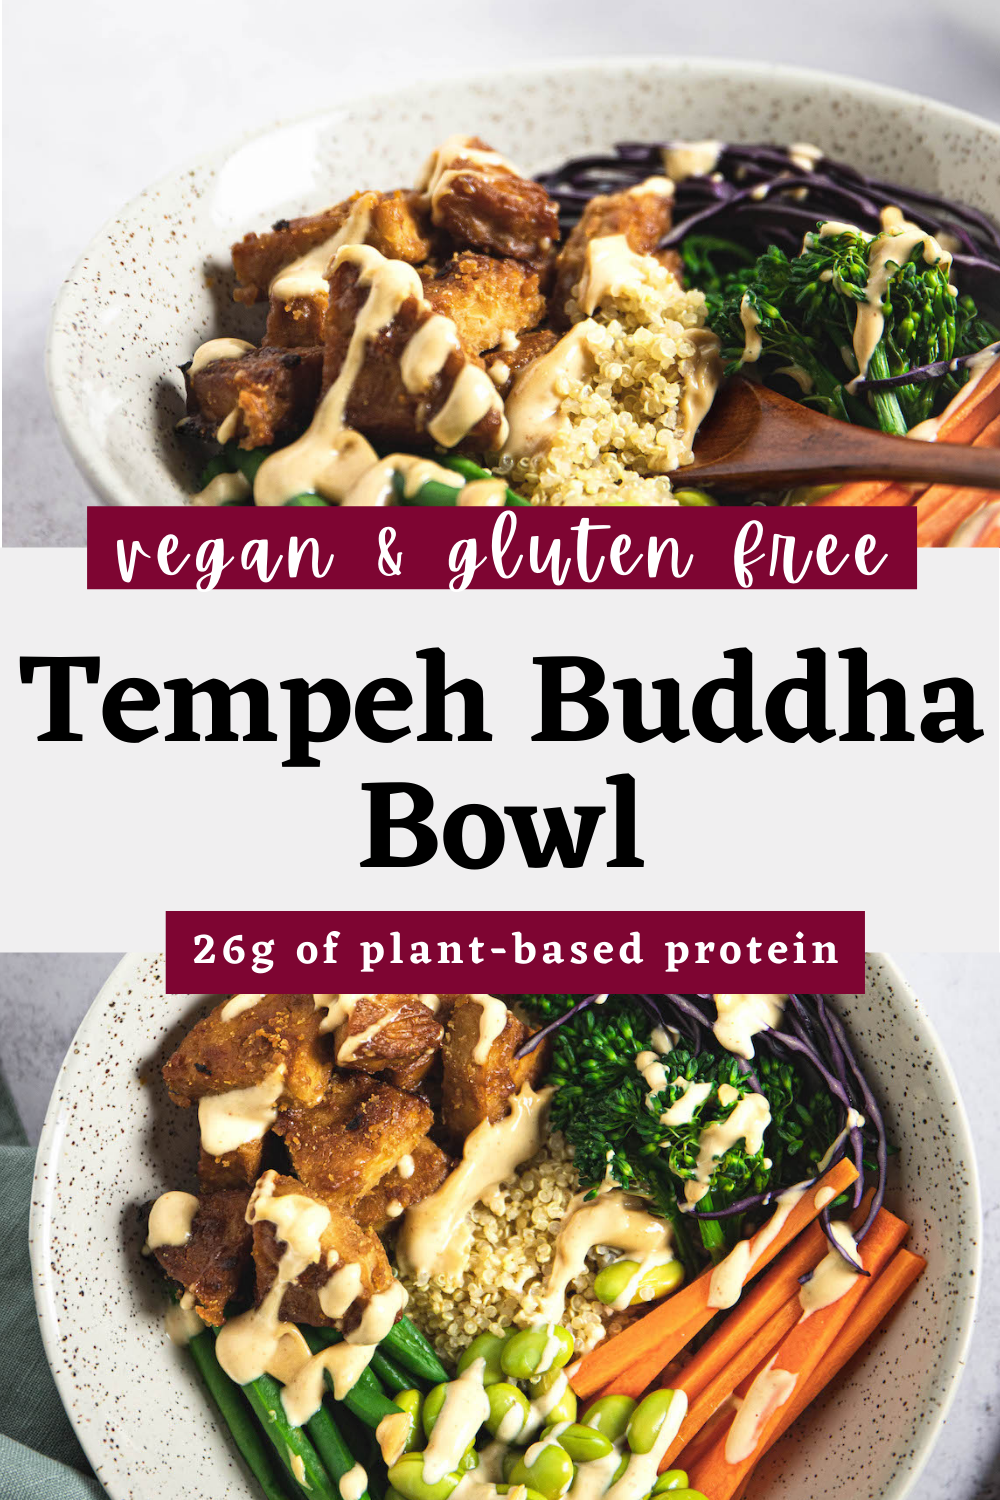 tempeh-buddha-bowl-1 - Spoonful of Kindness